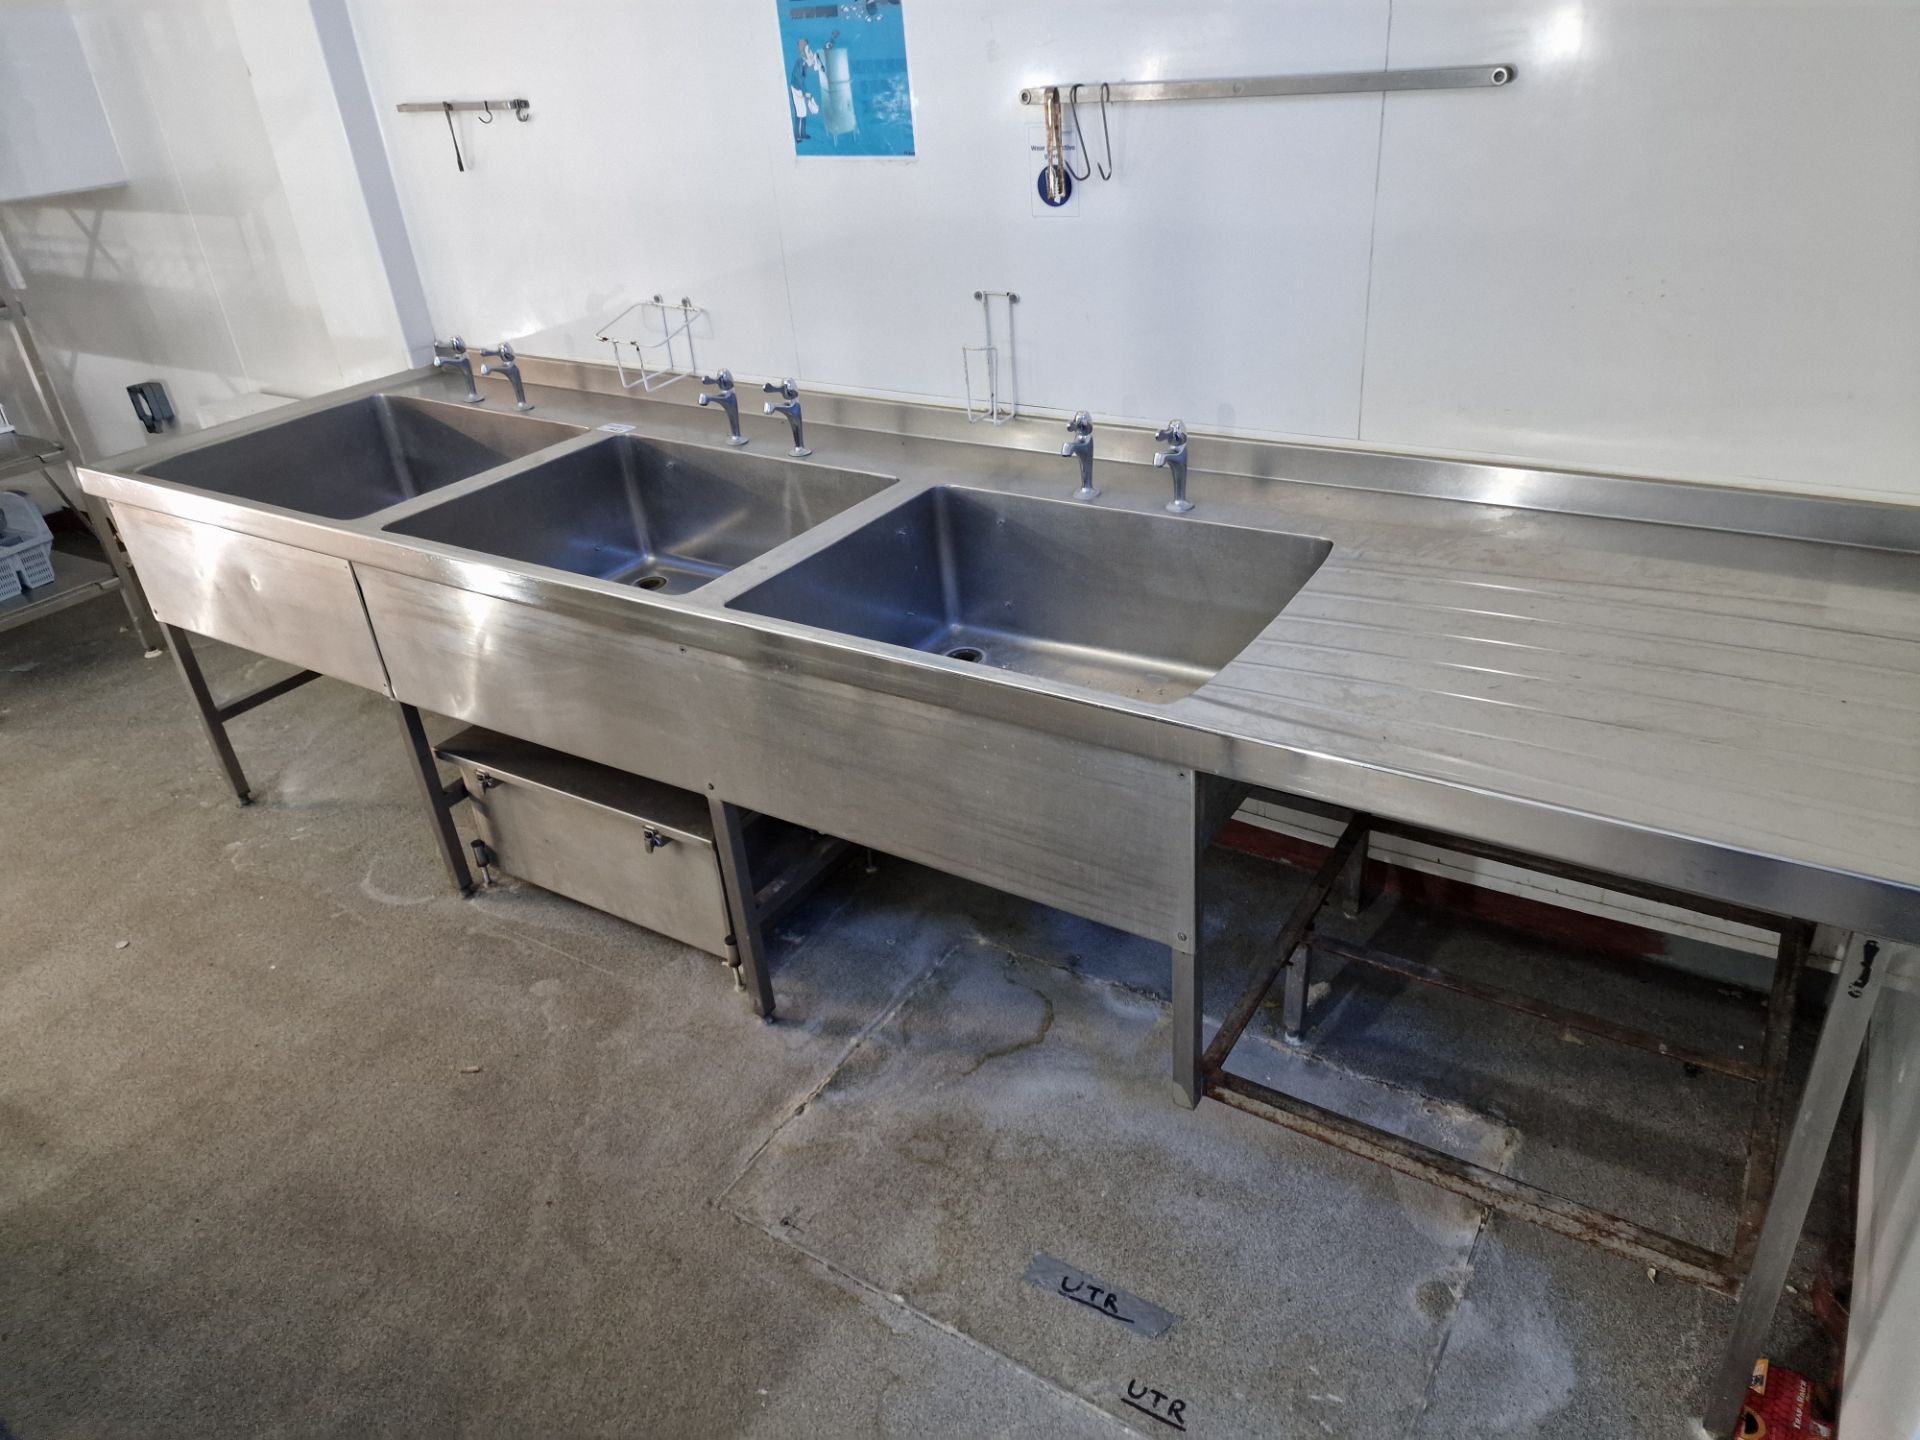 Stainless Steel Commercial Triple Bowl Sink Right Hand Drainer With Grease Trap Unit And Tap Faucets